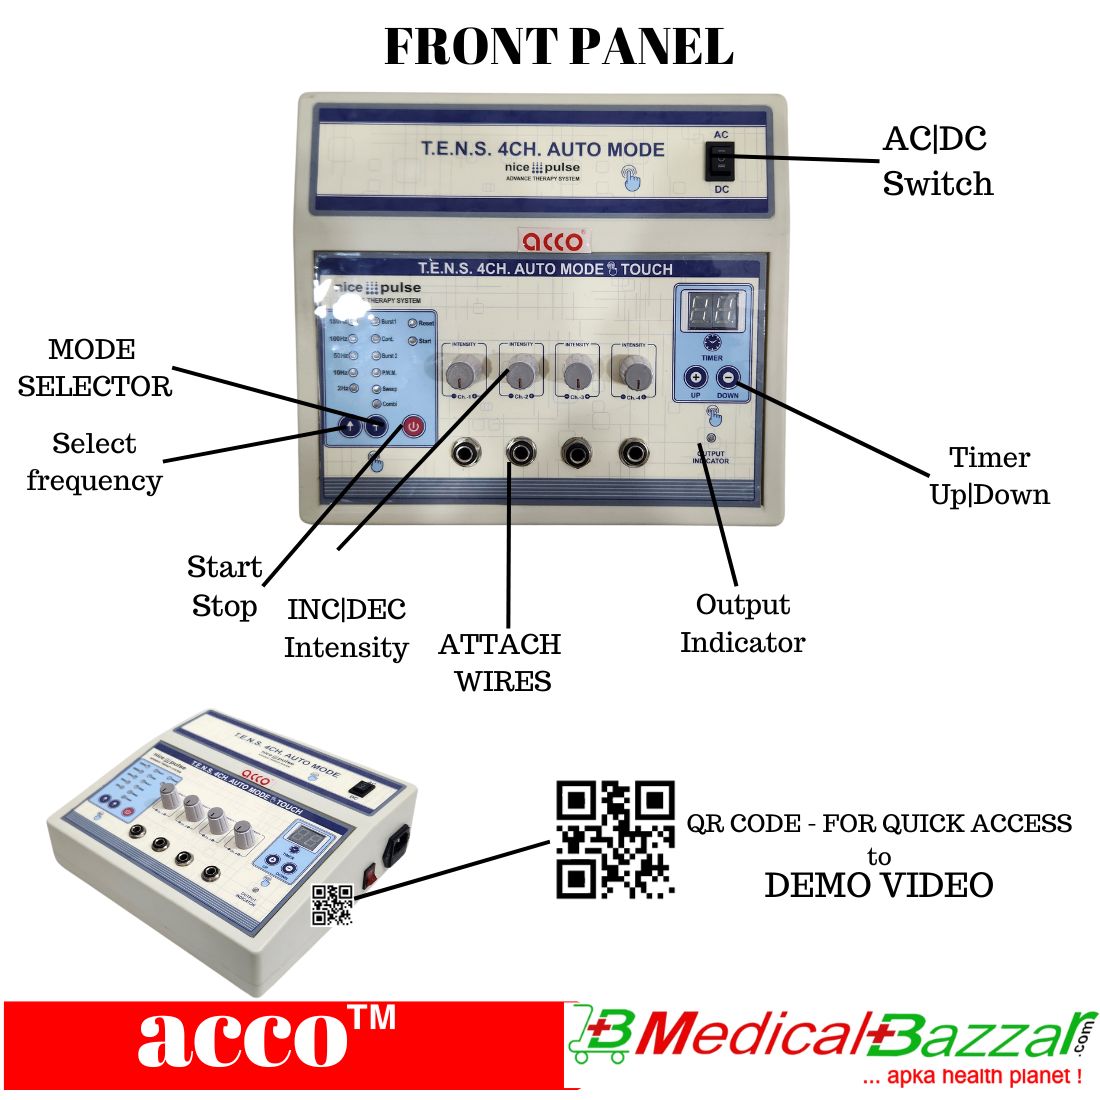 acco Tens Machine (with 3 Hrs Battery Backup & Touch Buttons)